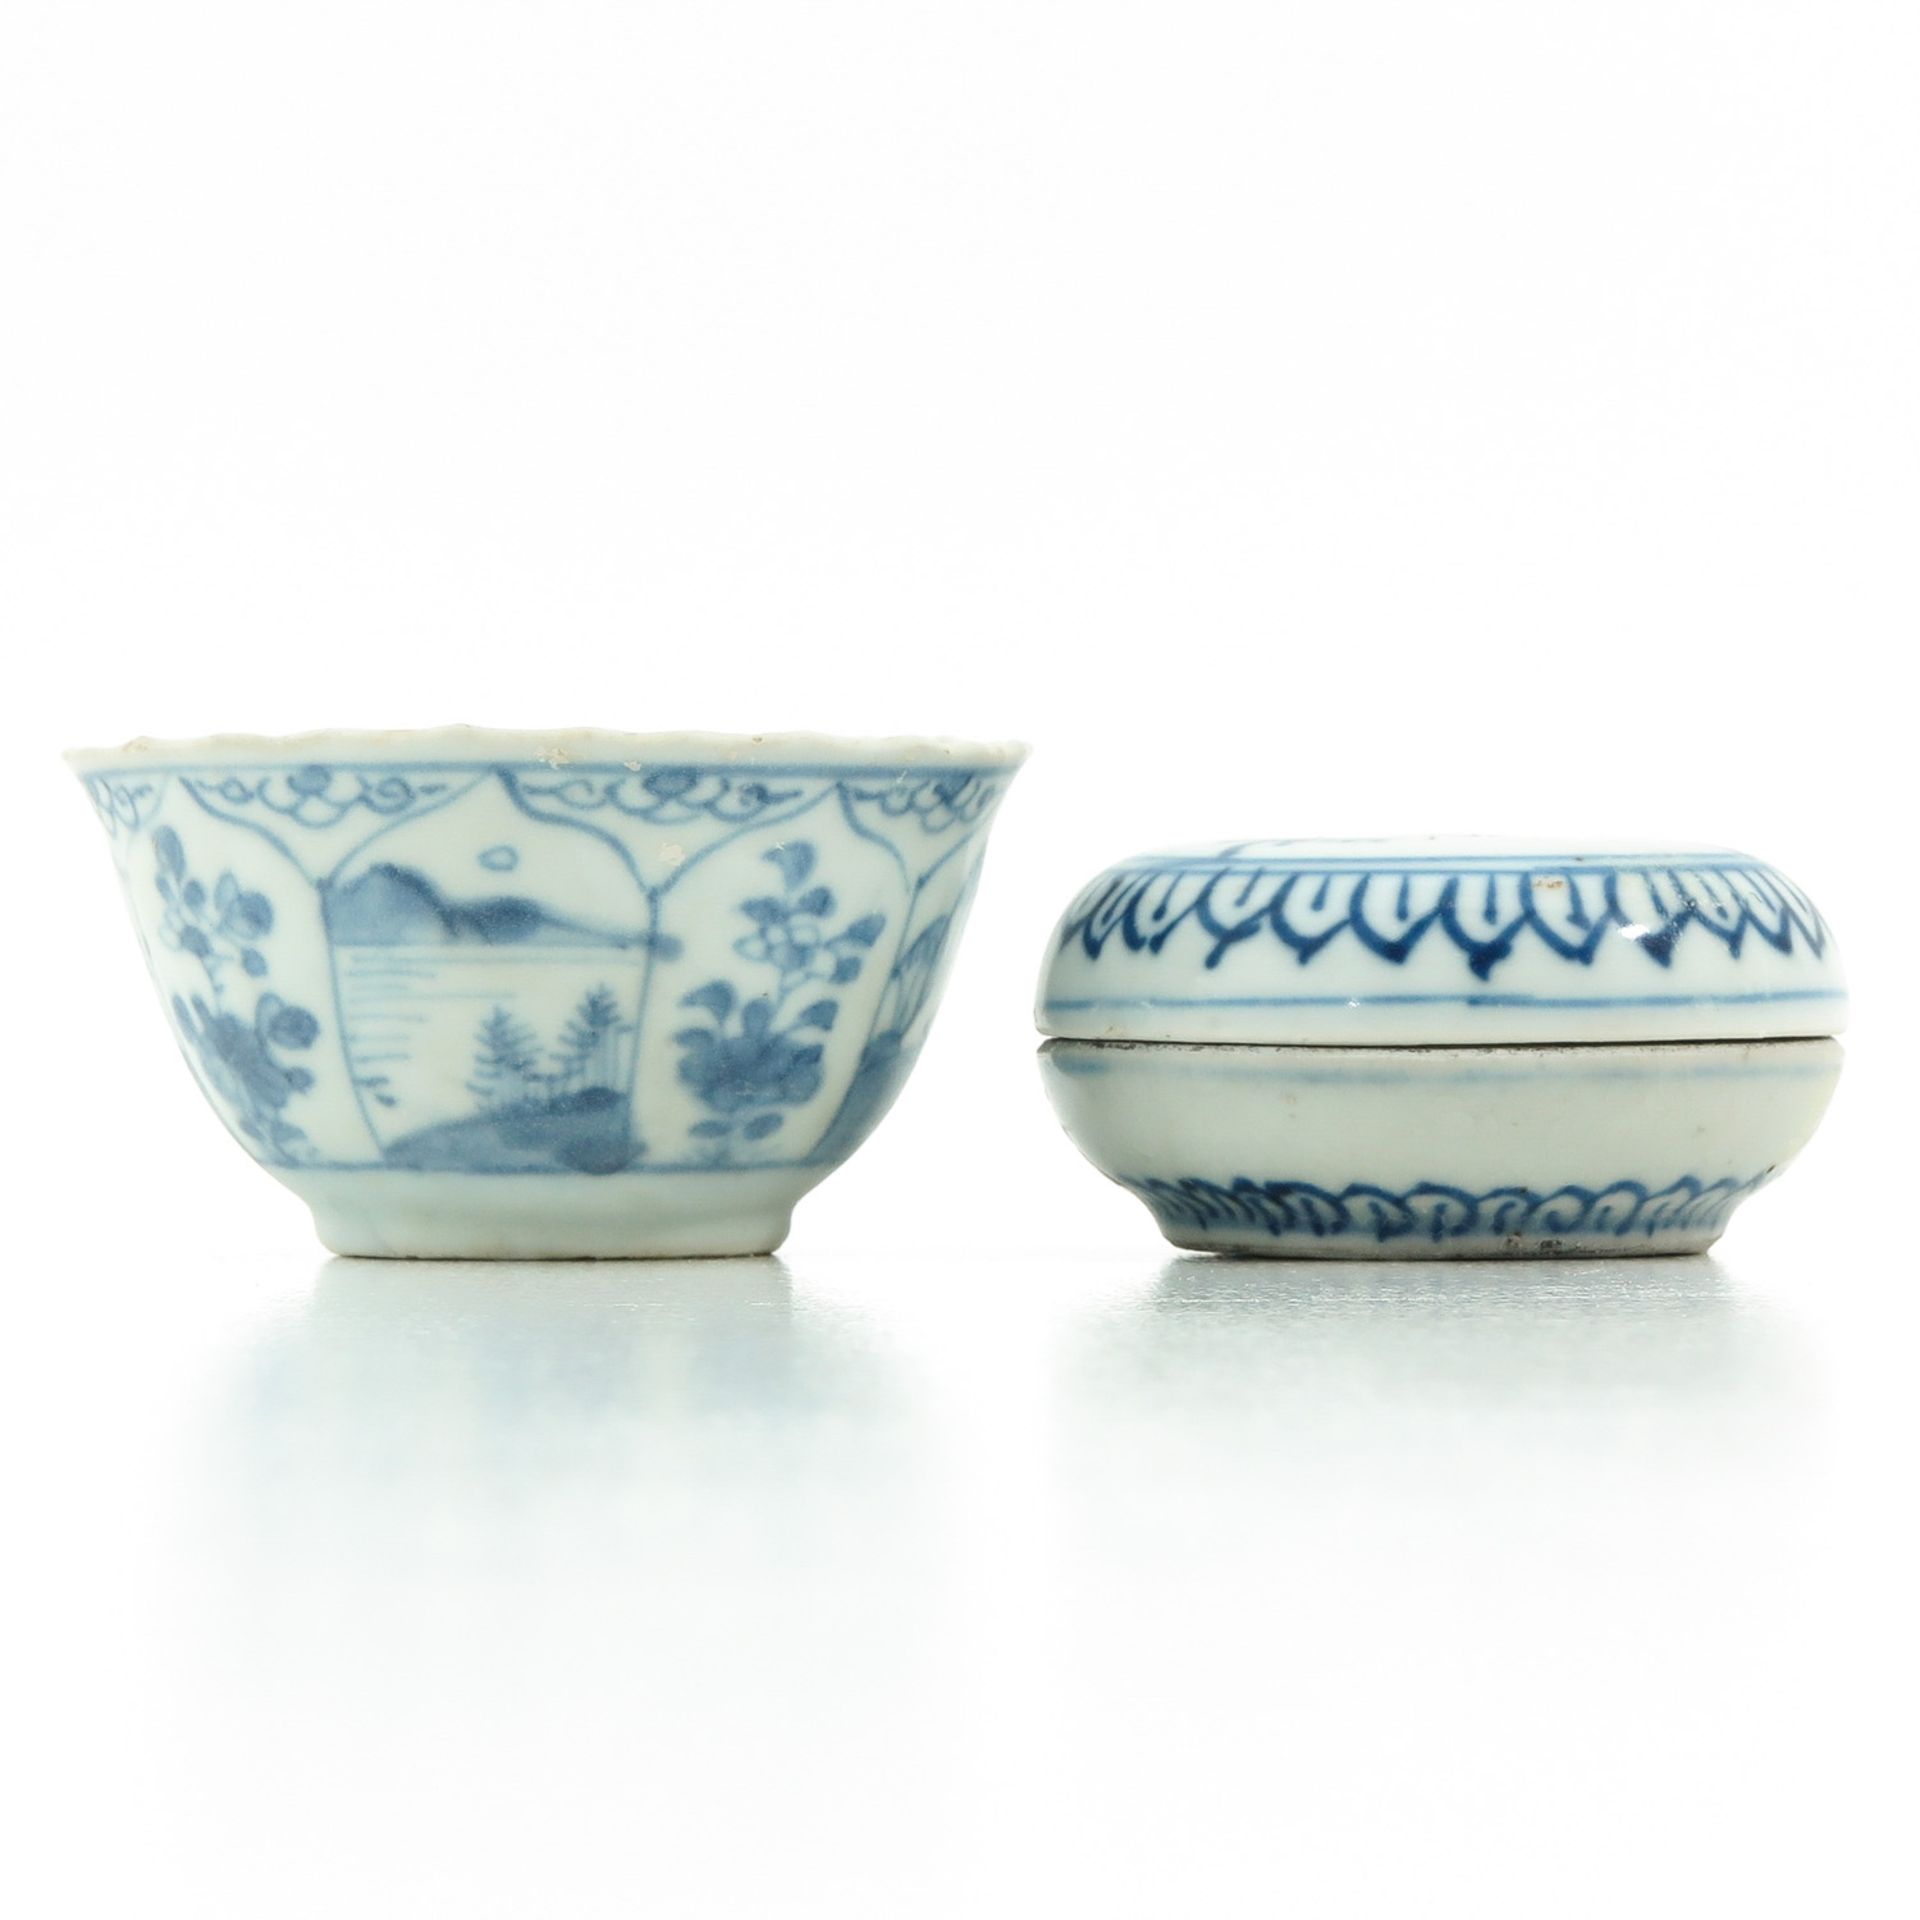 A Collection of Ship Wreck Porcelain - Image 4 of 10